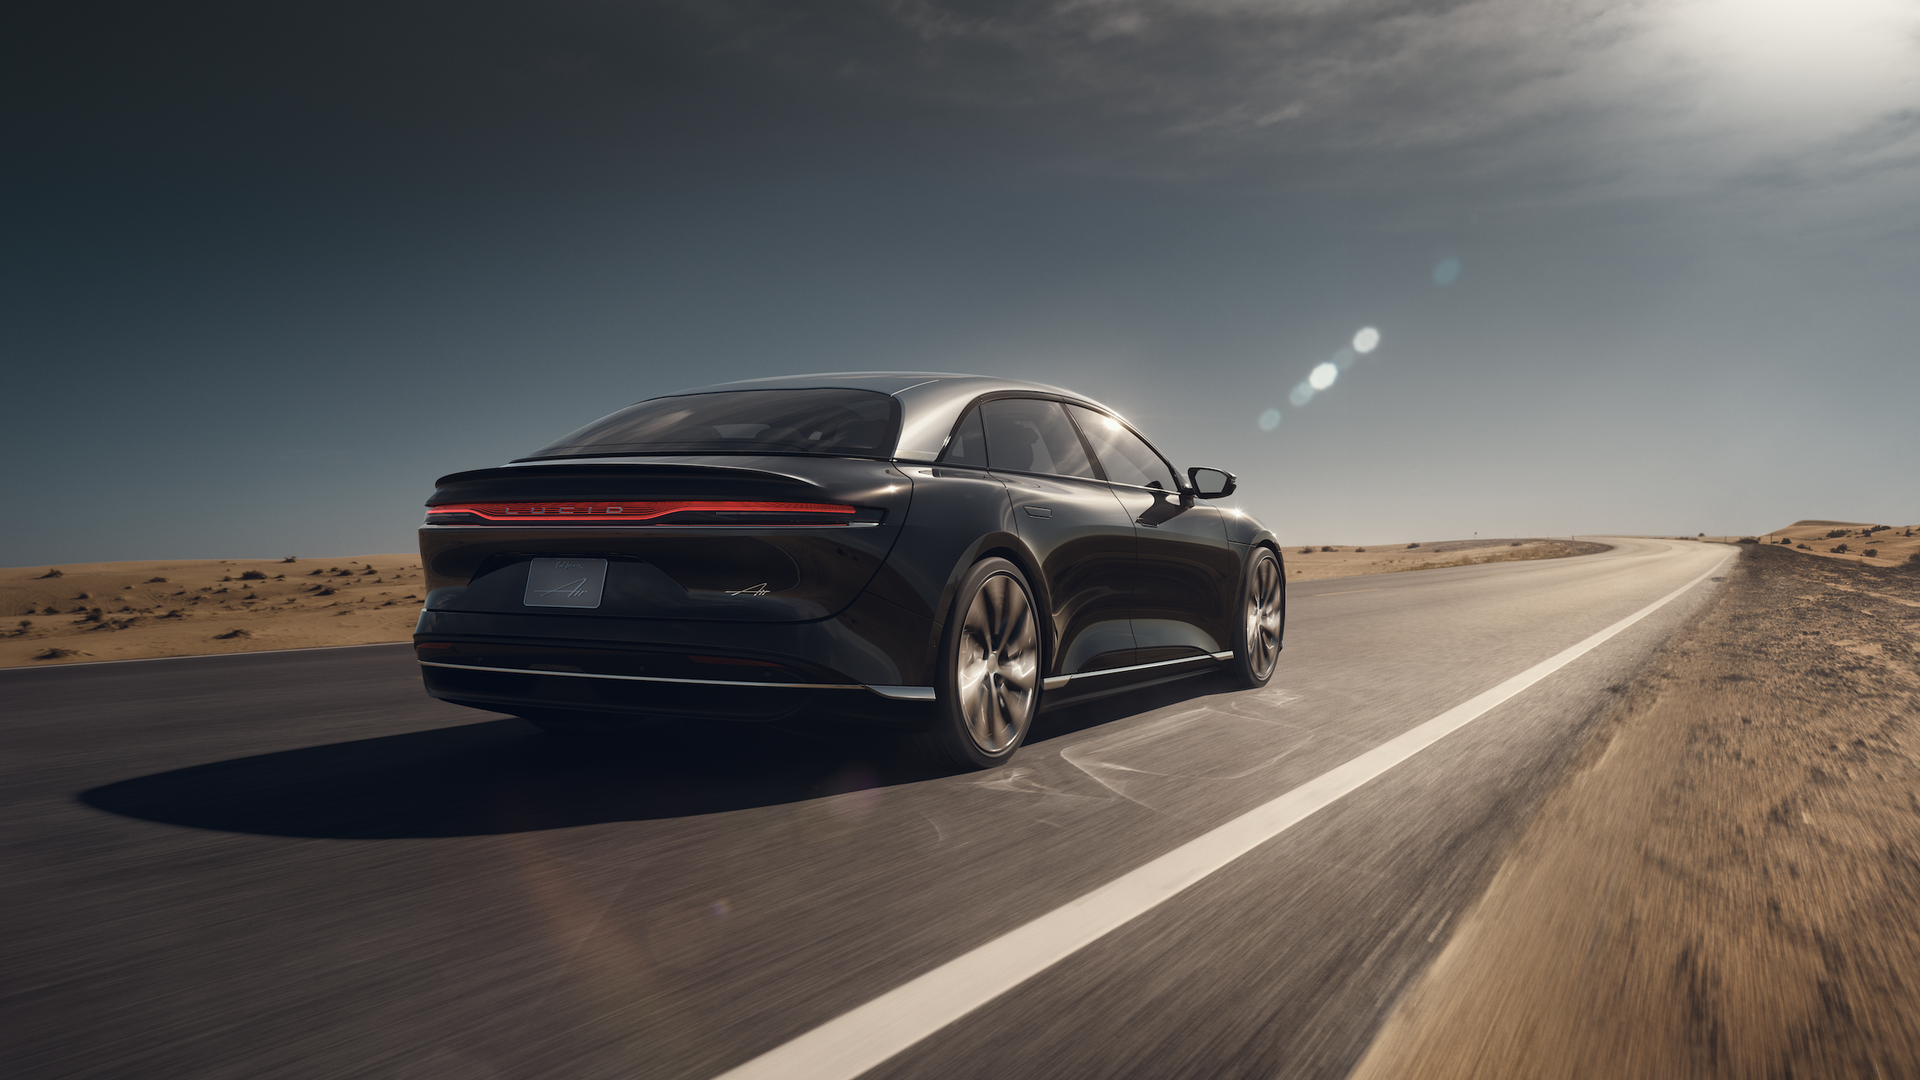 Beauty image of a Lucid Air electric sedan on a deserted highway, from Lucid Motors